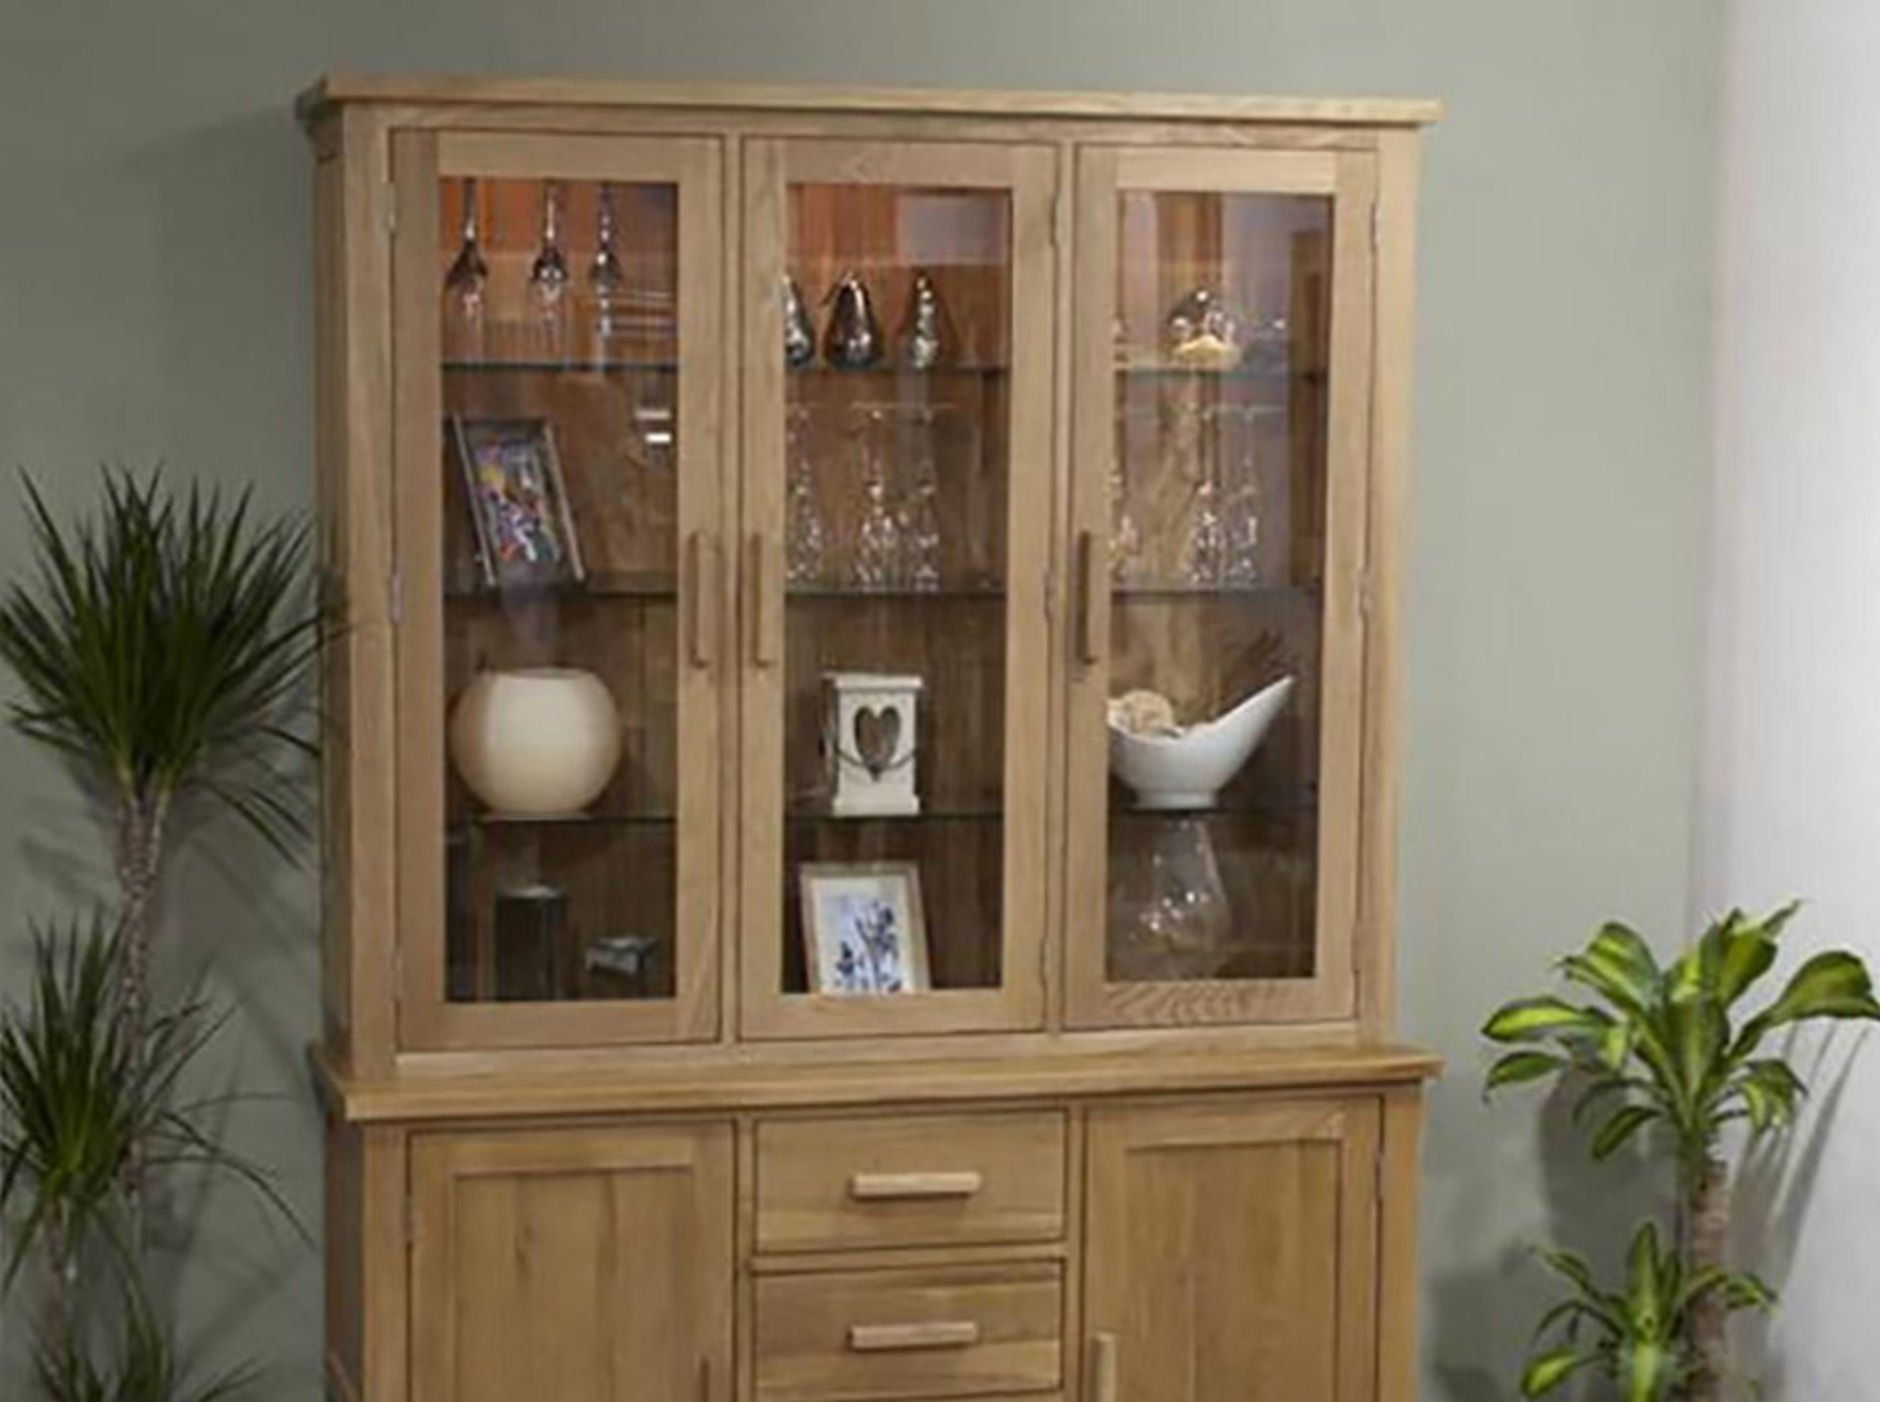 Solid Oak furniture from Top Secret Furniture Holmes Chapel, Cheshire